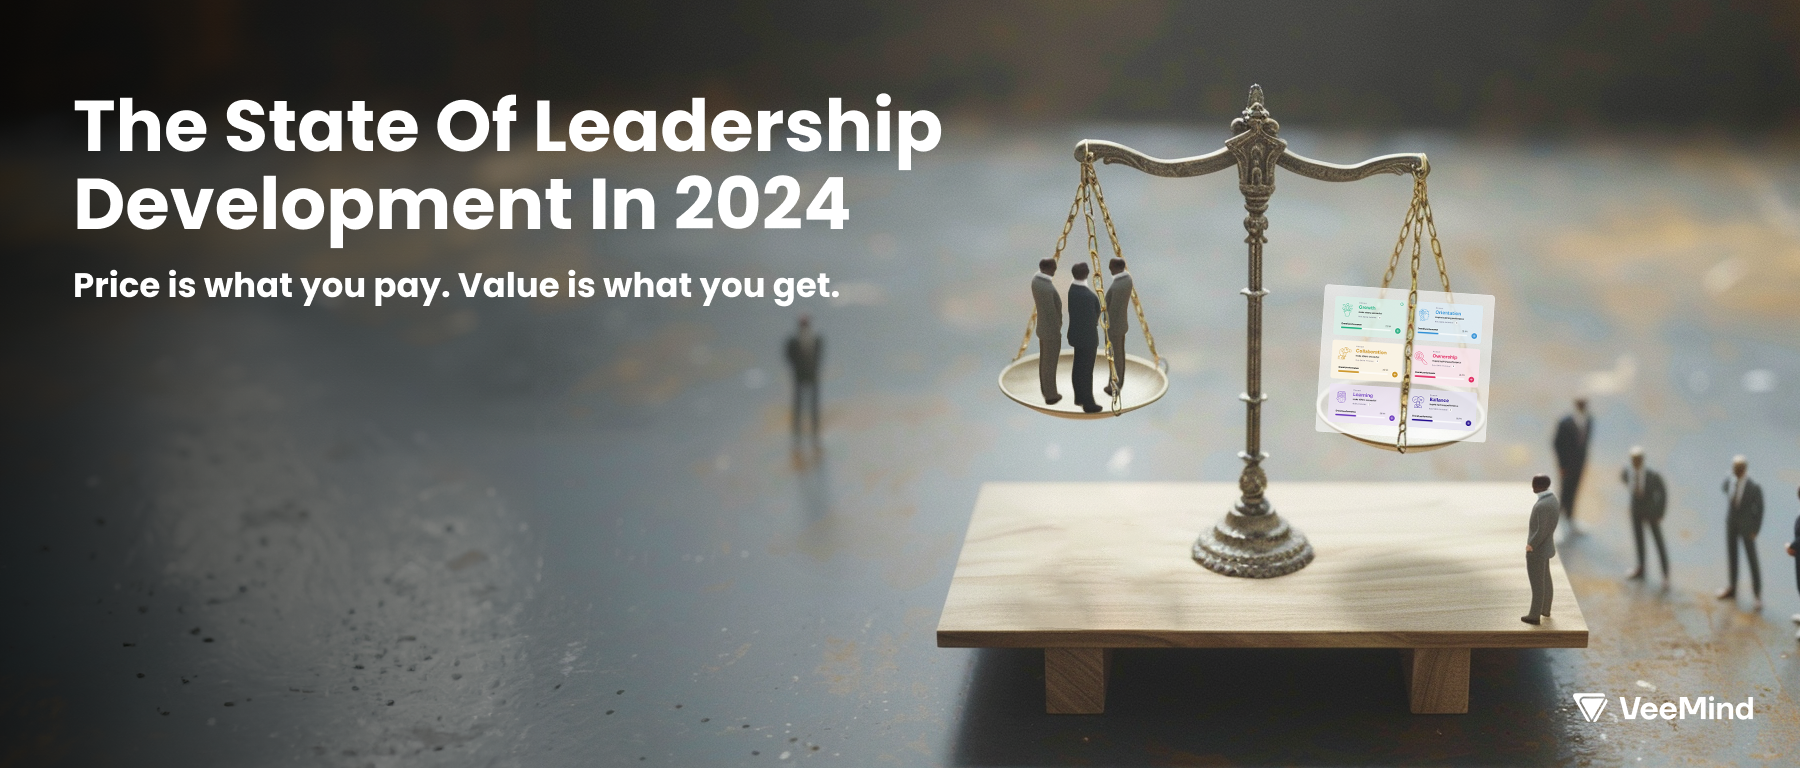 The State Of Leadership Development In 2024 